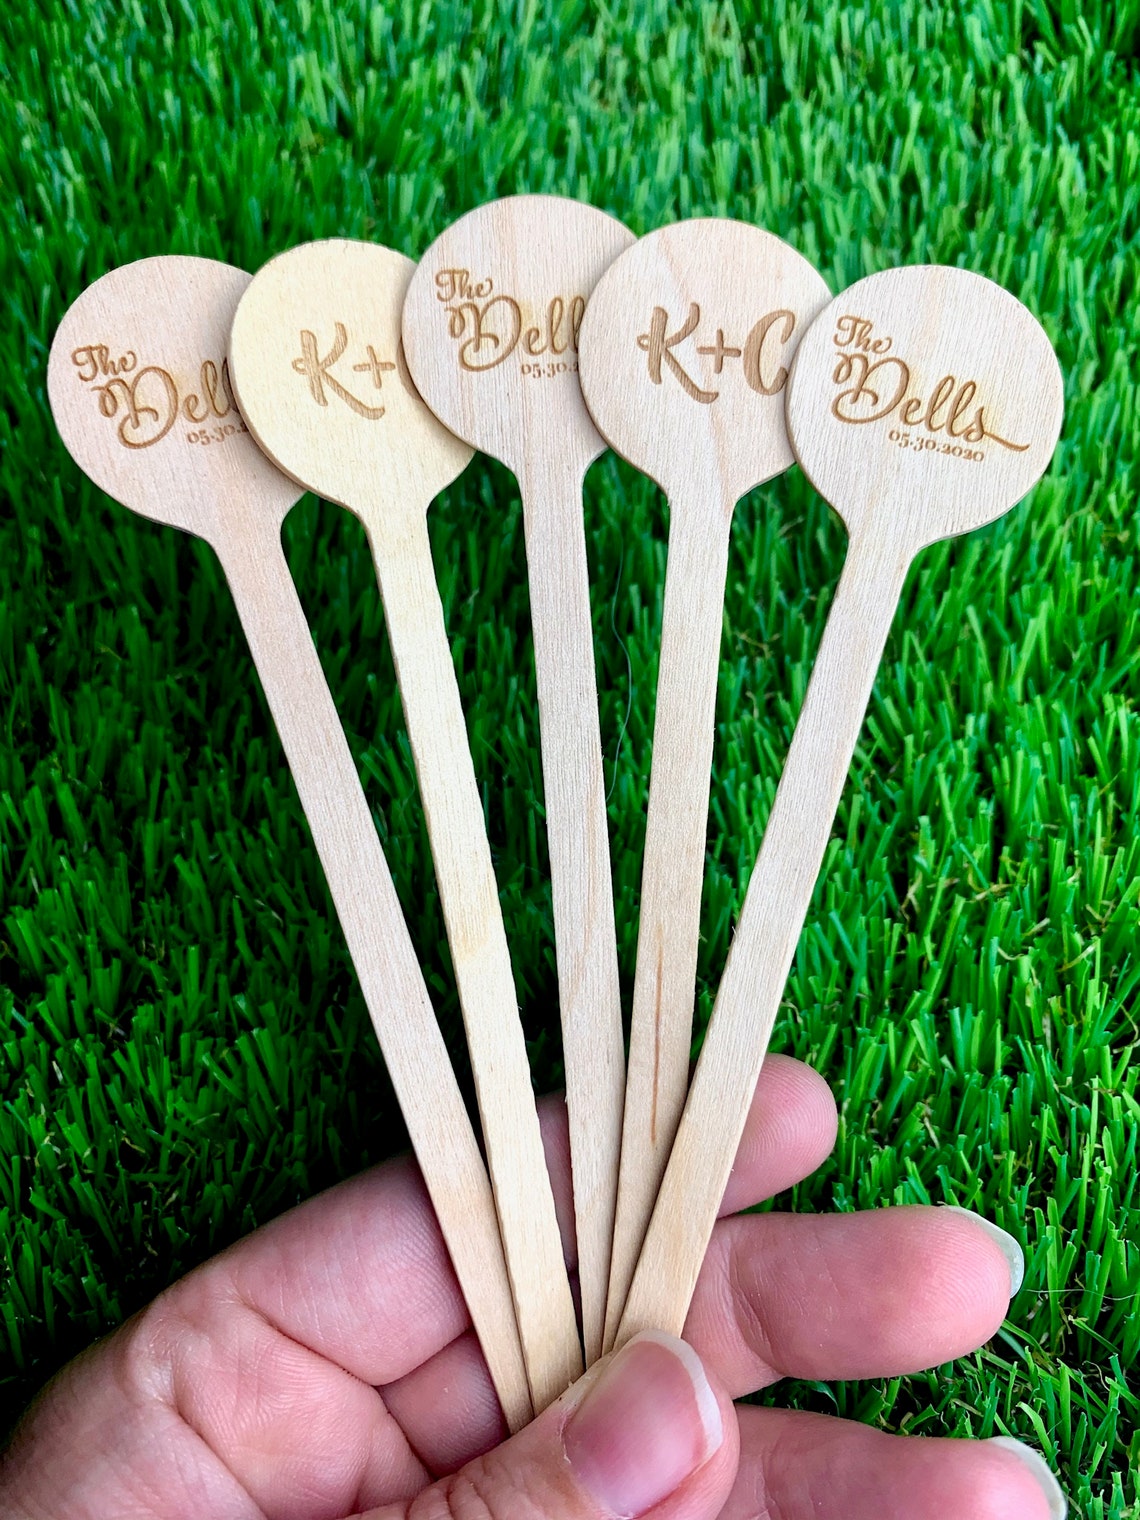 100pcs Rustic Wedding Stir Sticks with Initials and Date Engraved  Customized Cocktail Party Stirrers Natural Wood Swizzle Stick